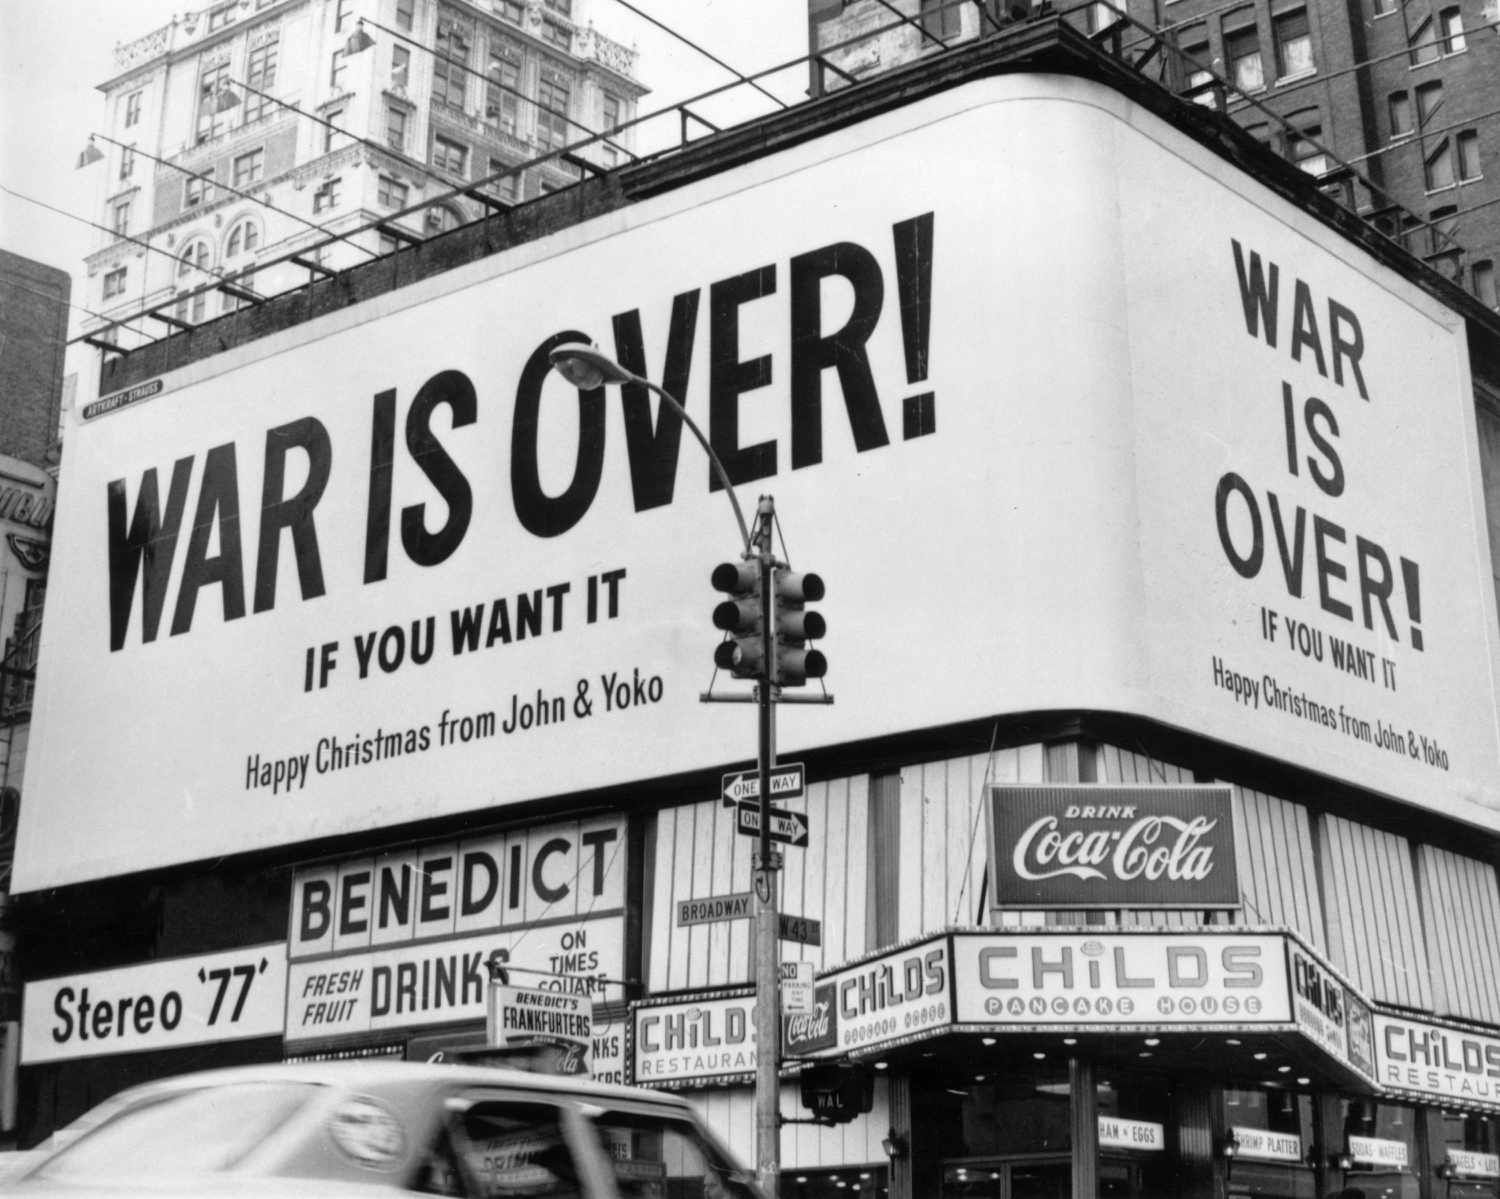 War is Over! Inspired by the Music of John and Yoko